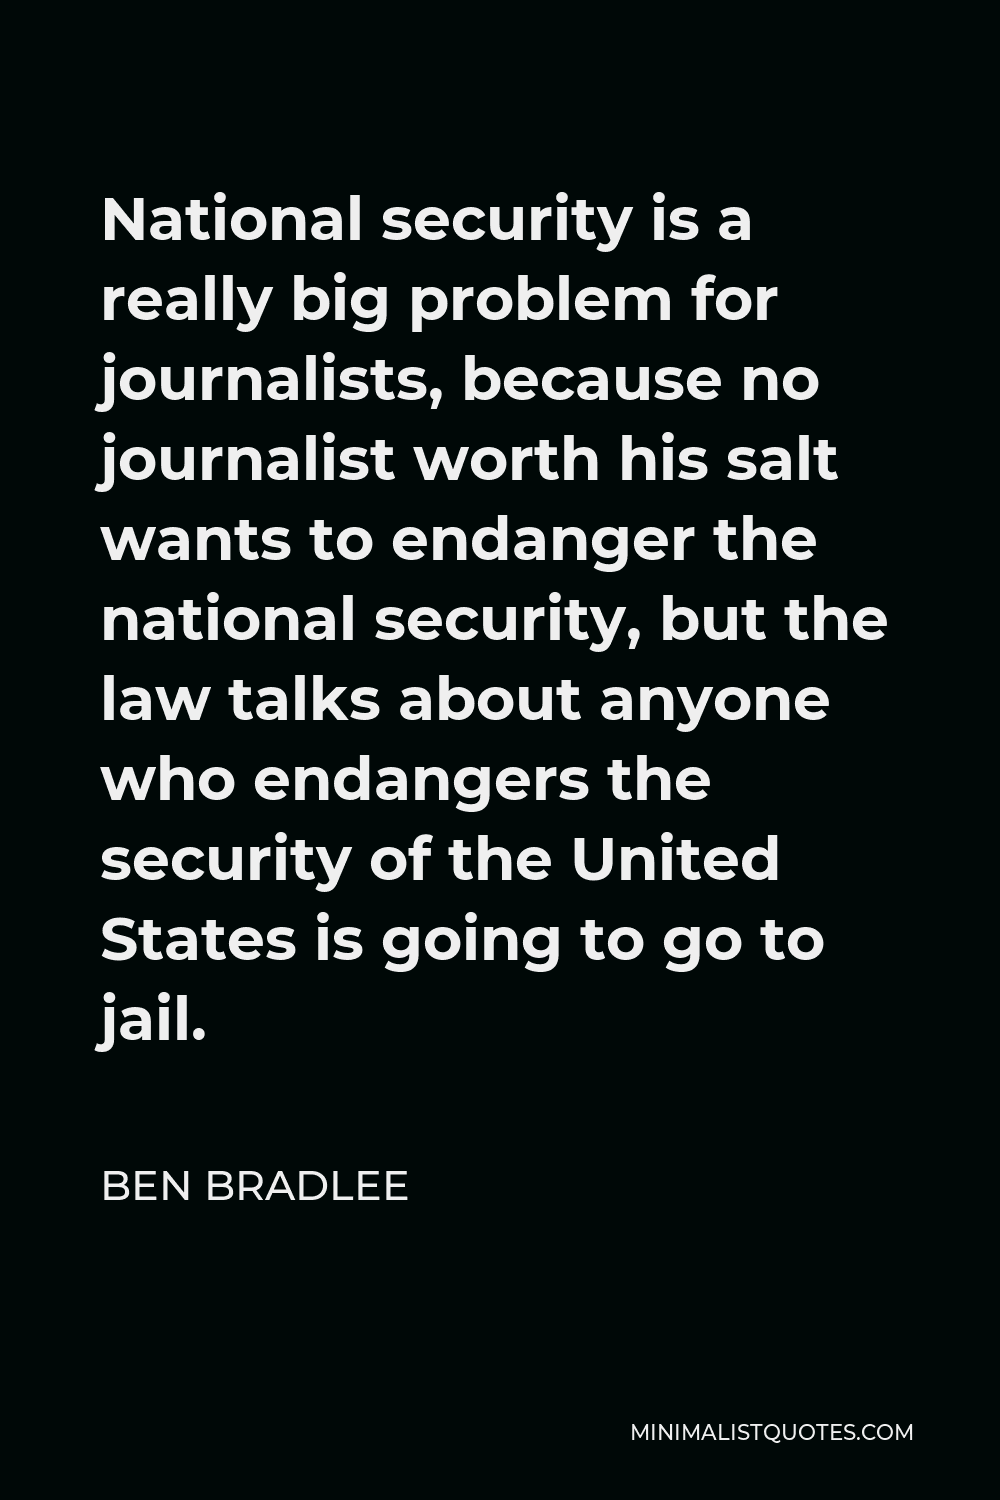 Ben Bradlee Quote - National security is a really big problem for journalists, because no journalist worth his salt wants to endanger the national security, but the law talks about anyone who endangers the security of the United States is going to go to jail.